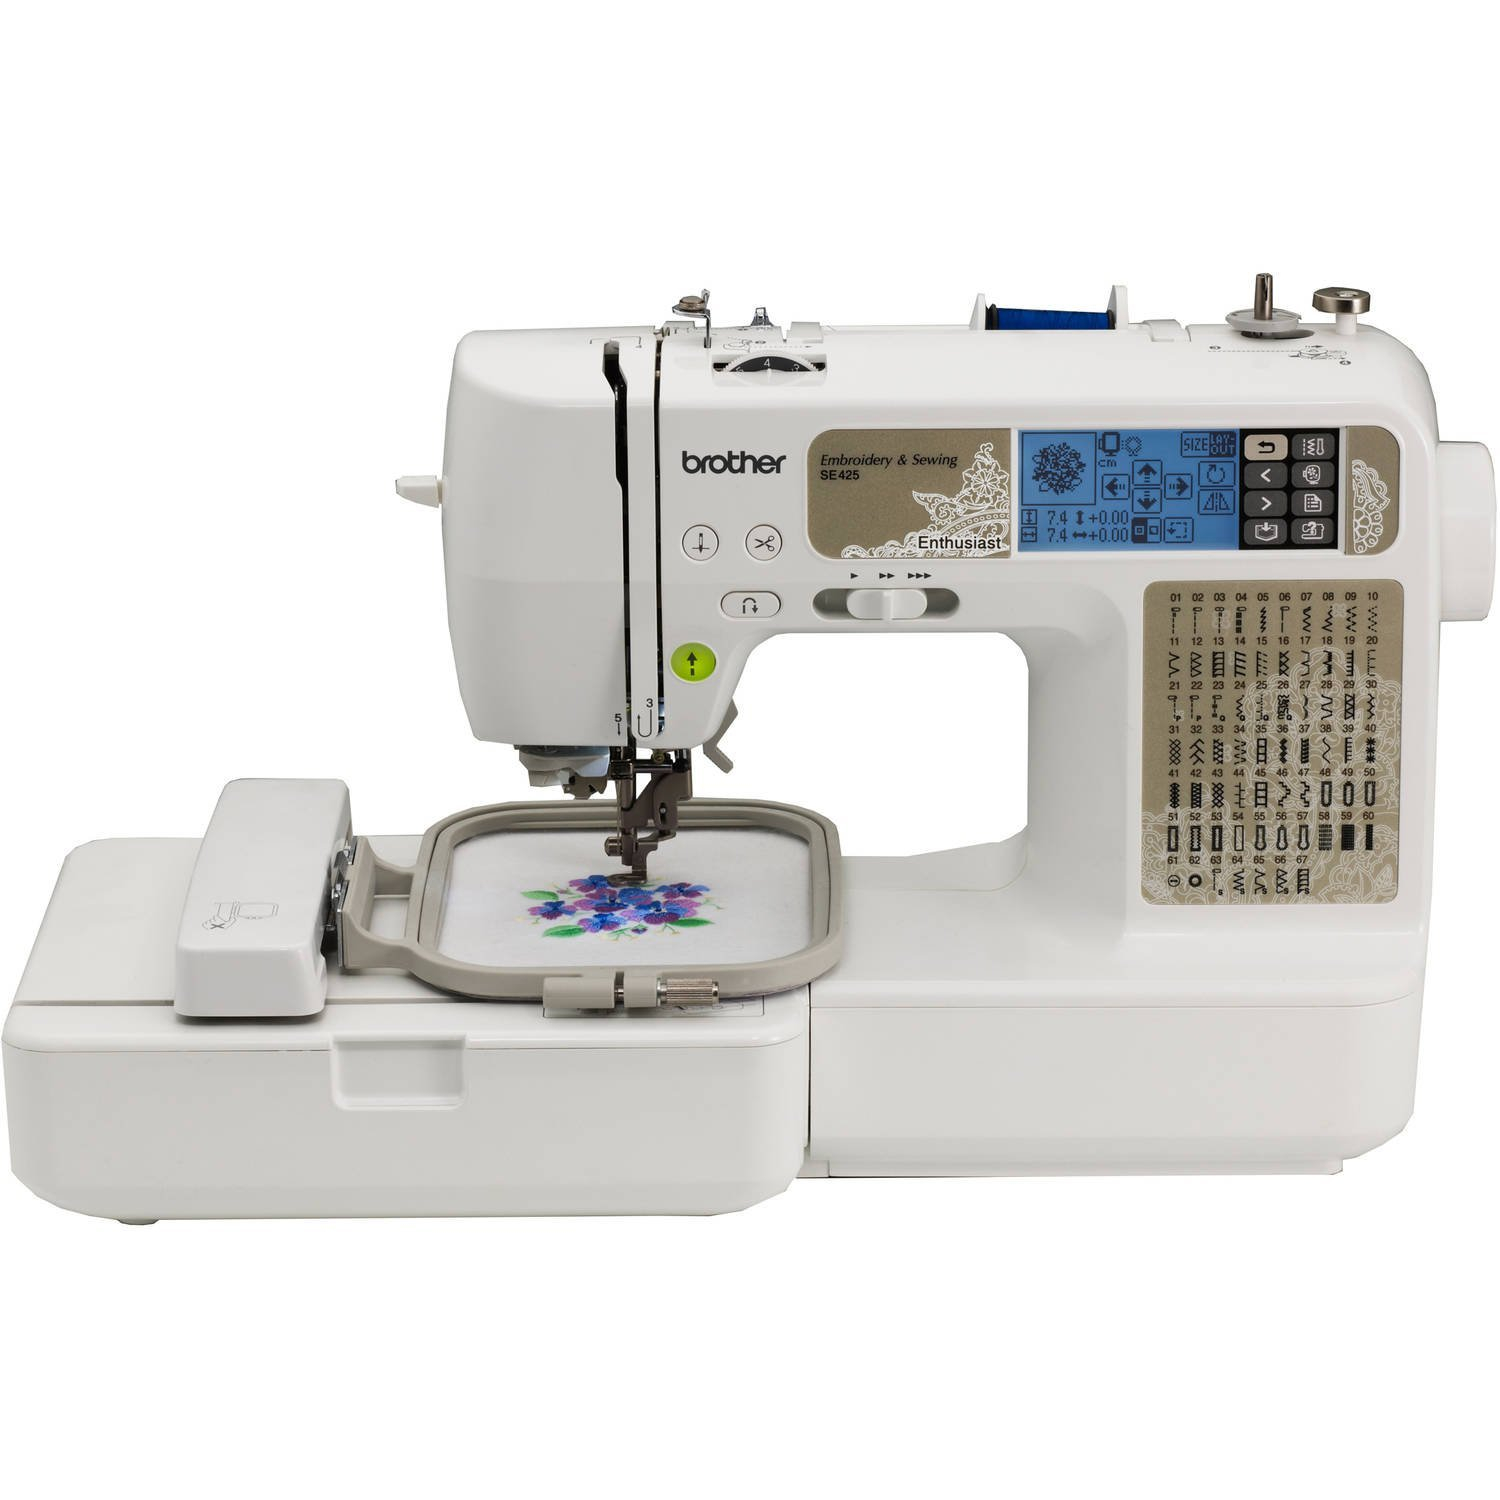 Brother Se400 Embroidery Patterns Brother Se400 Vs Cs6000i Ultimate Comparison August 2019 Doyousew